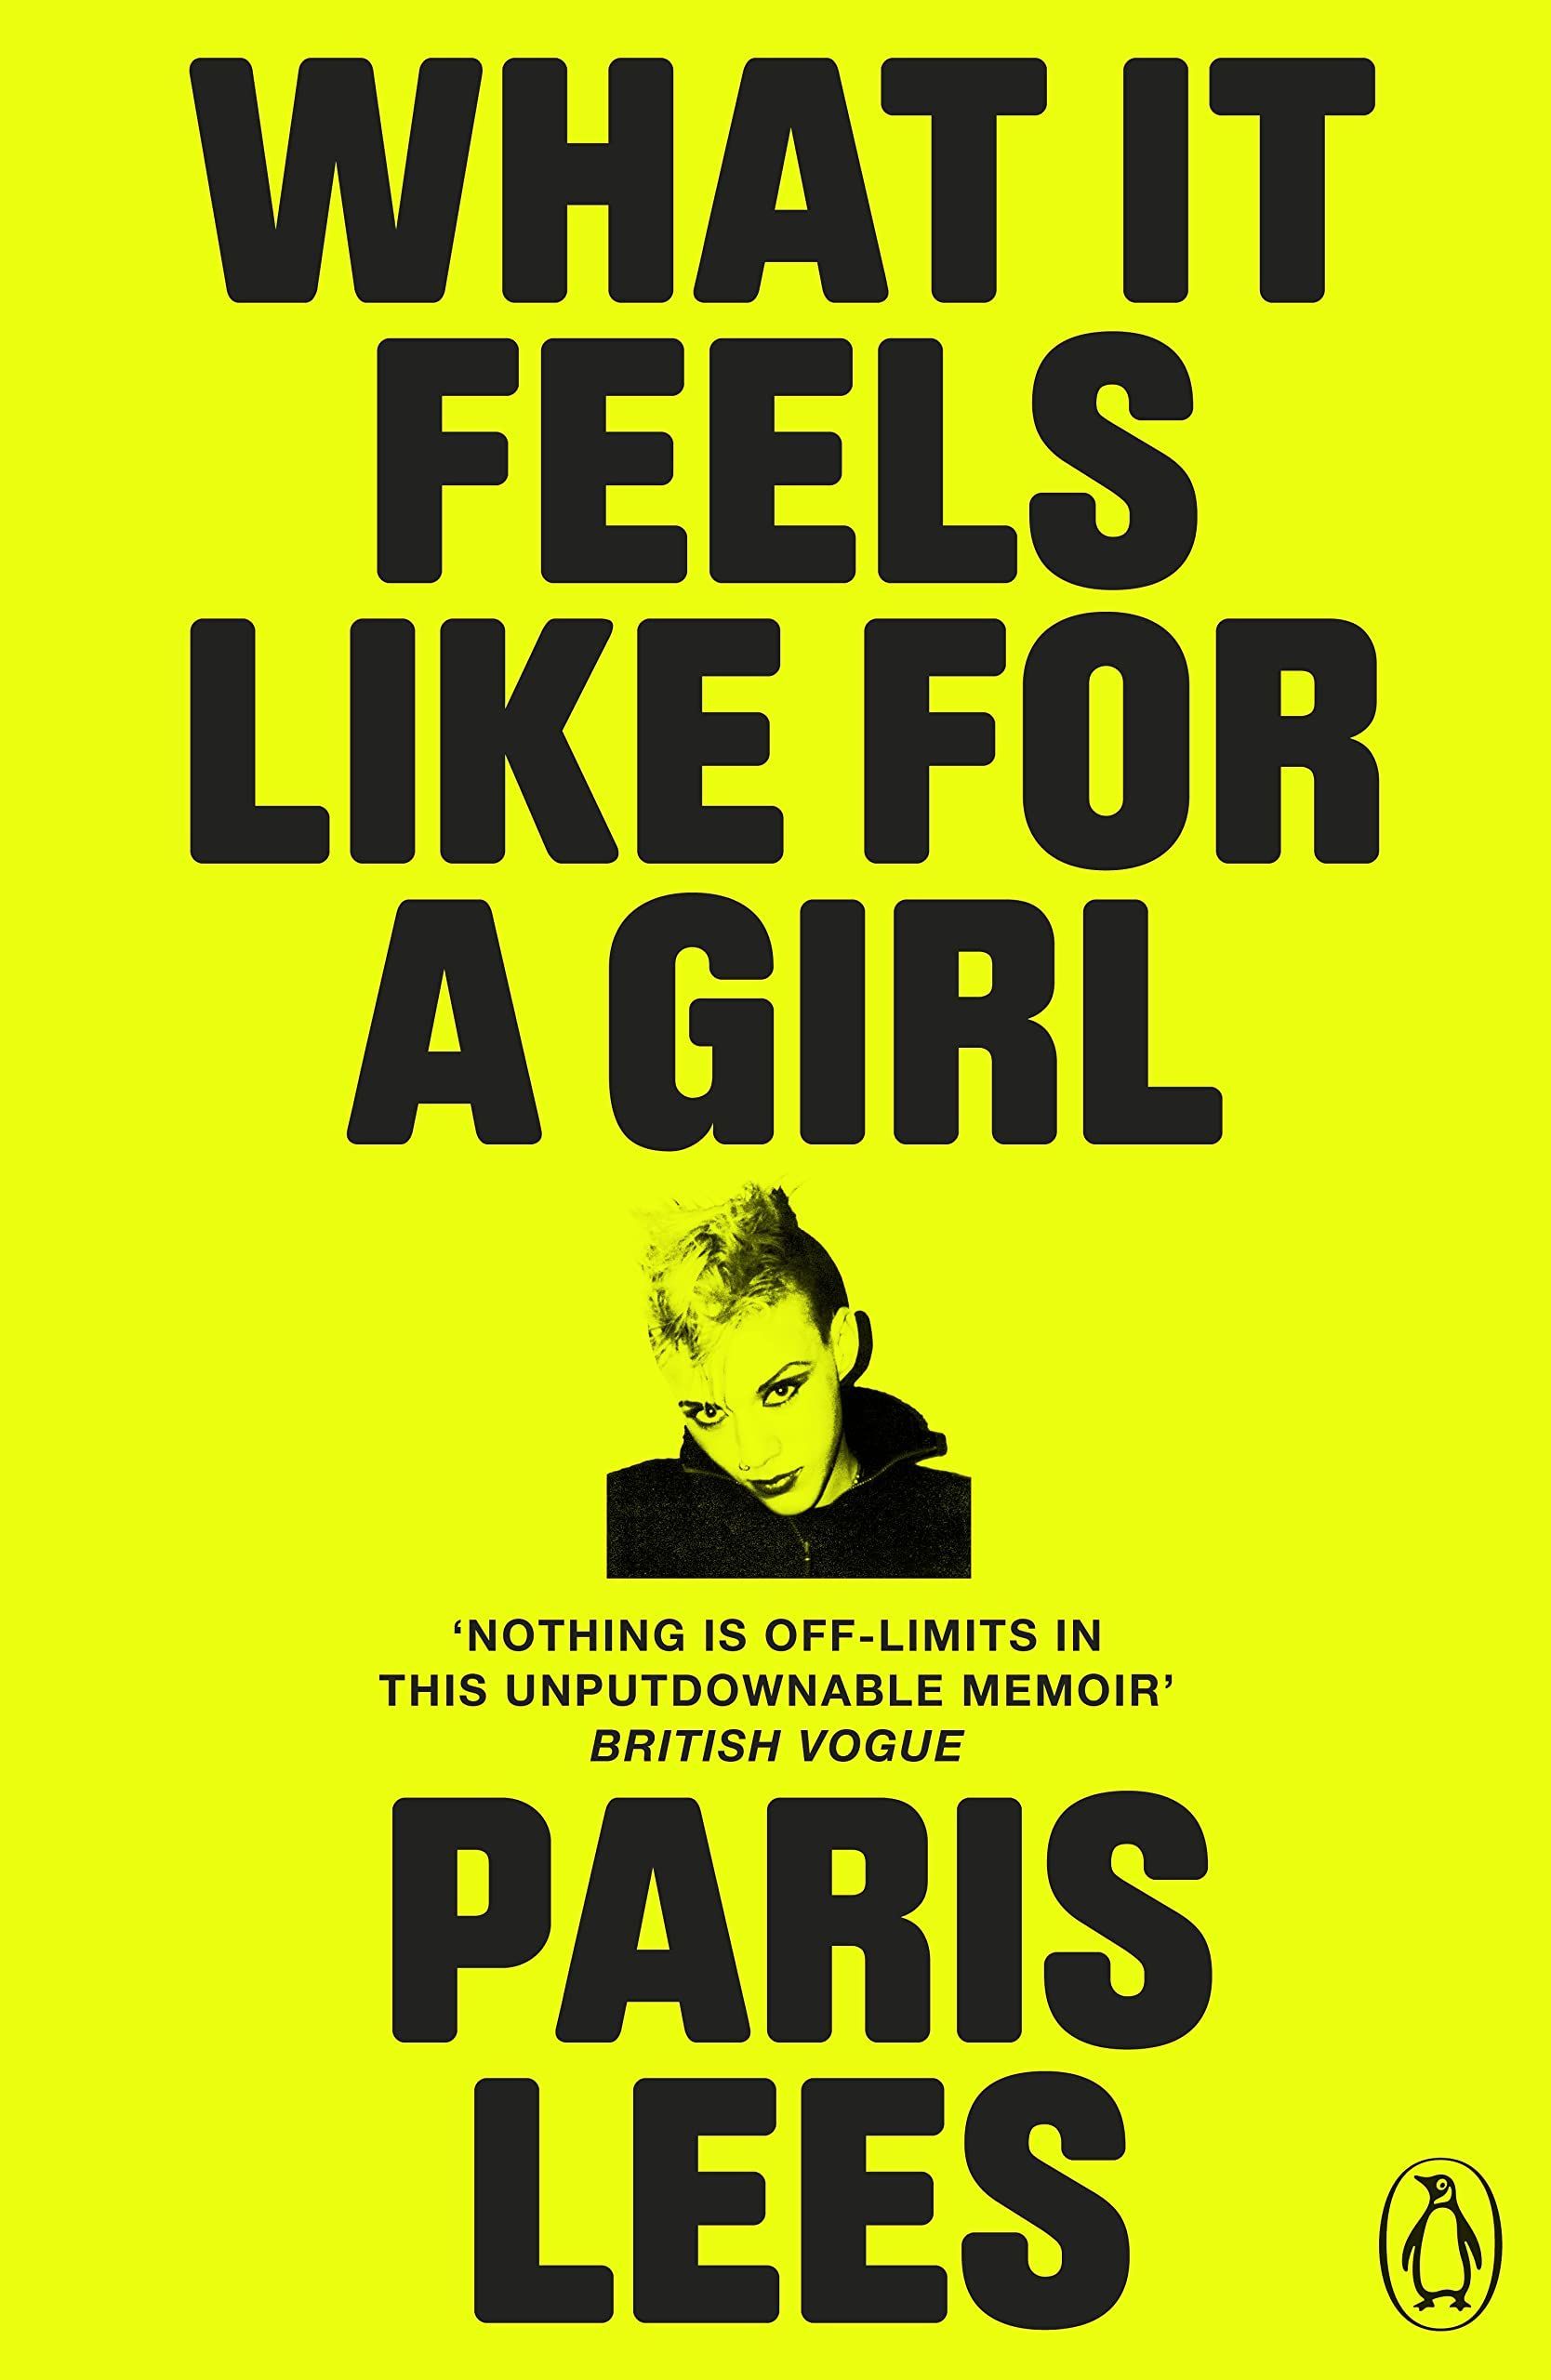 <p><strong>£9.65</strong></p><p><a href="https://www.amazon.co.uk/dp/0141993081">Shop Now</a></p><p>In this hard hitting autobiography, Paris Lees dives headfirst into the dark and dangerous world of her memories growing up. Shining a light on growing up in the LGBTQ+ space in the 2000s, she recalls subjects of sexual exploitation, drug use and trans-identity, before thriving against the odds, and turning her life around. </p>